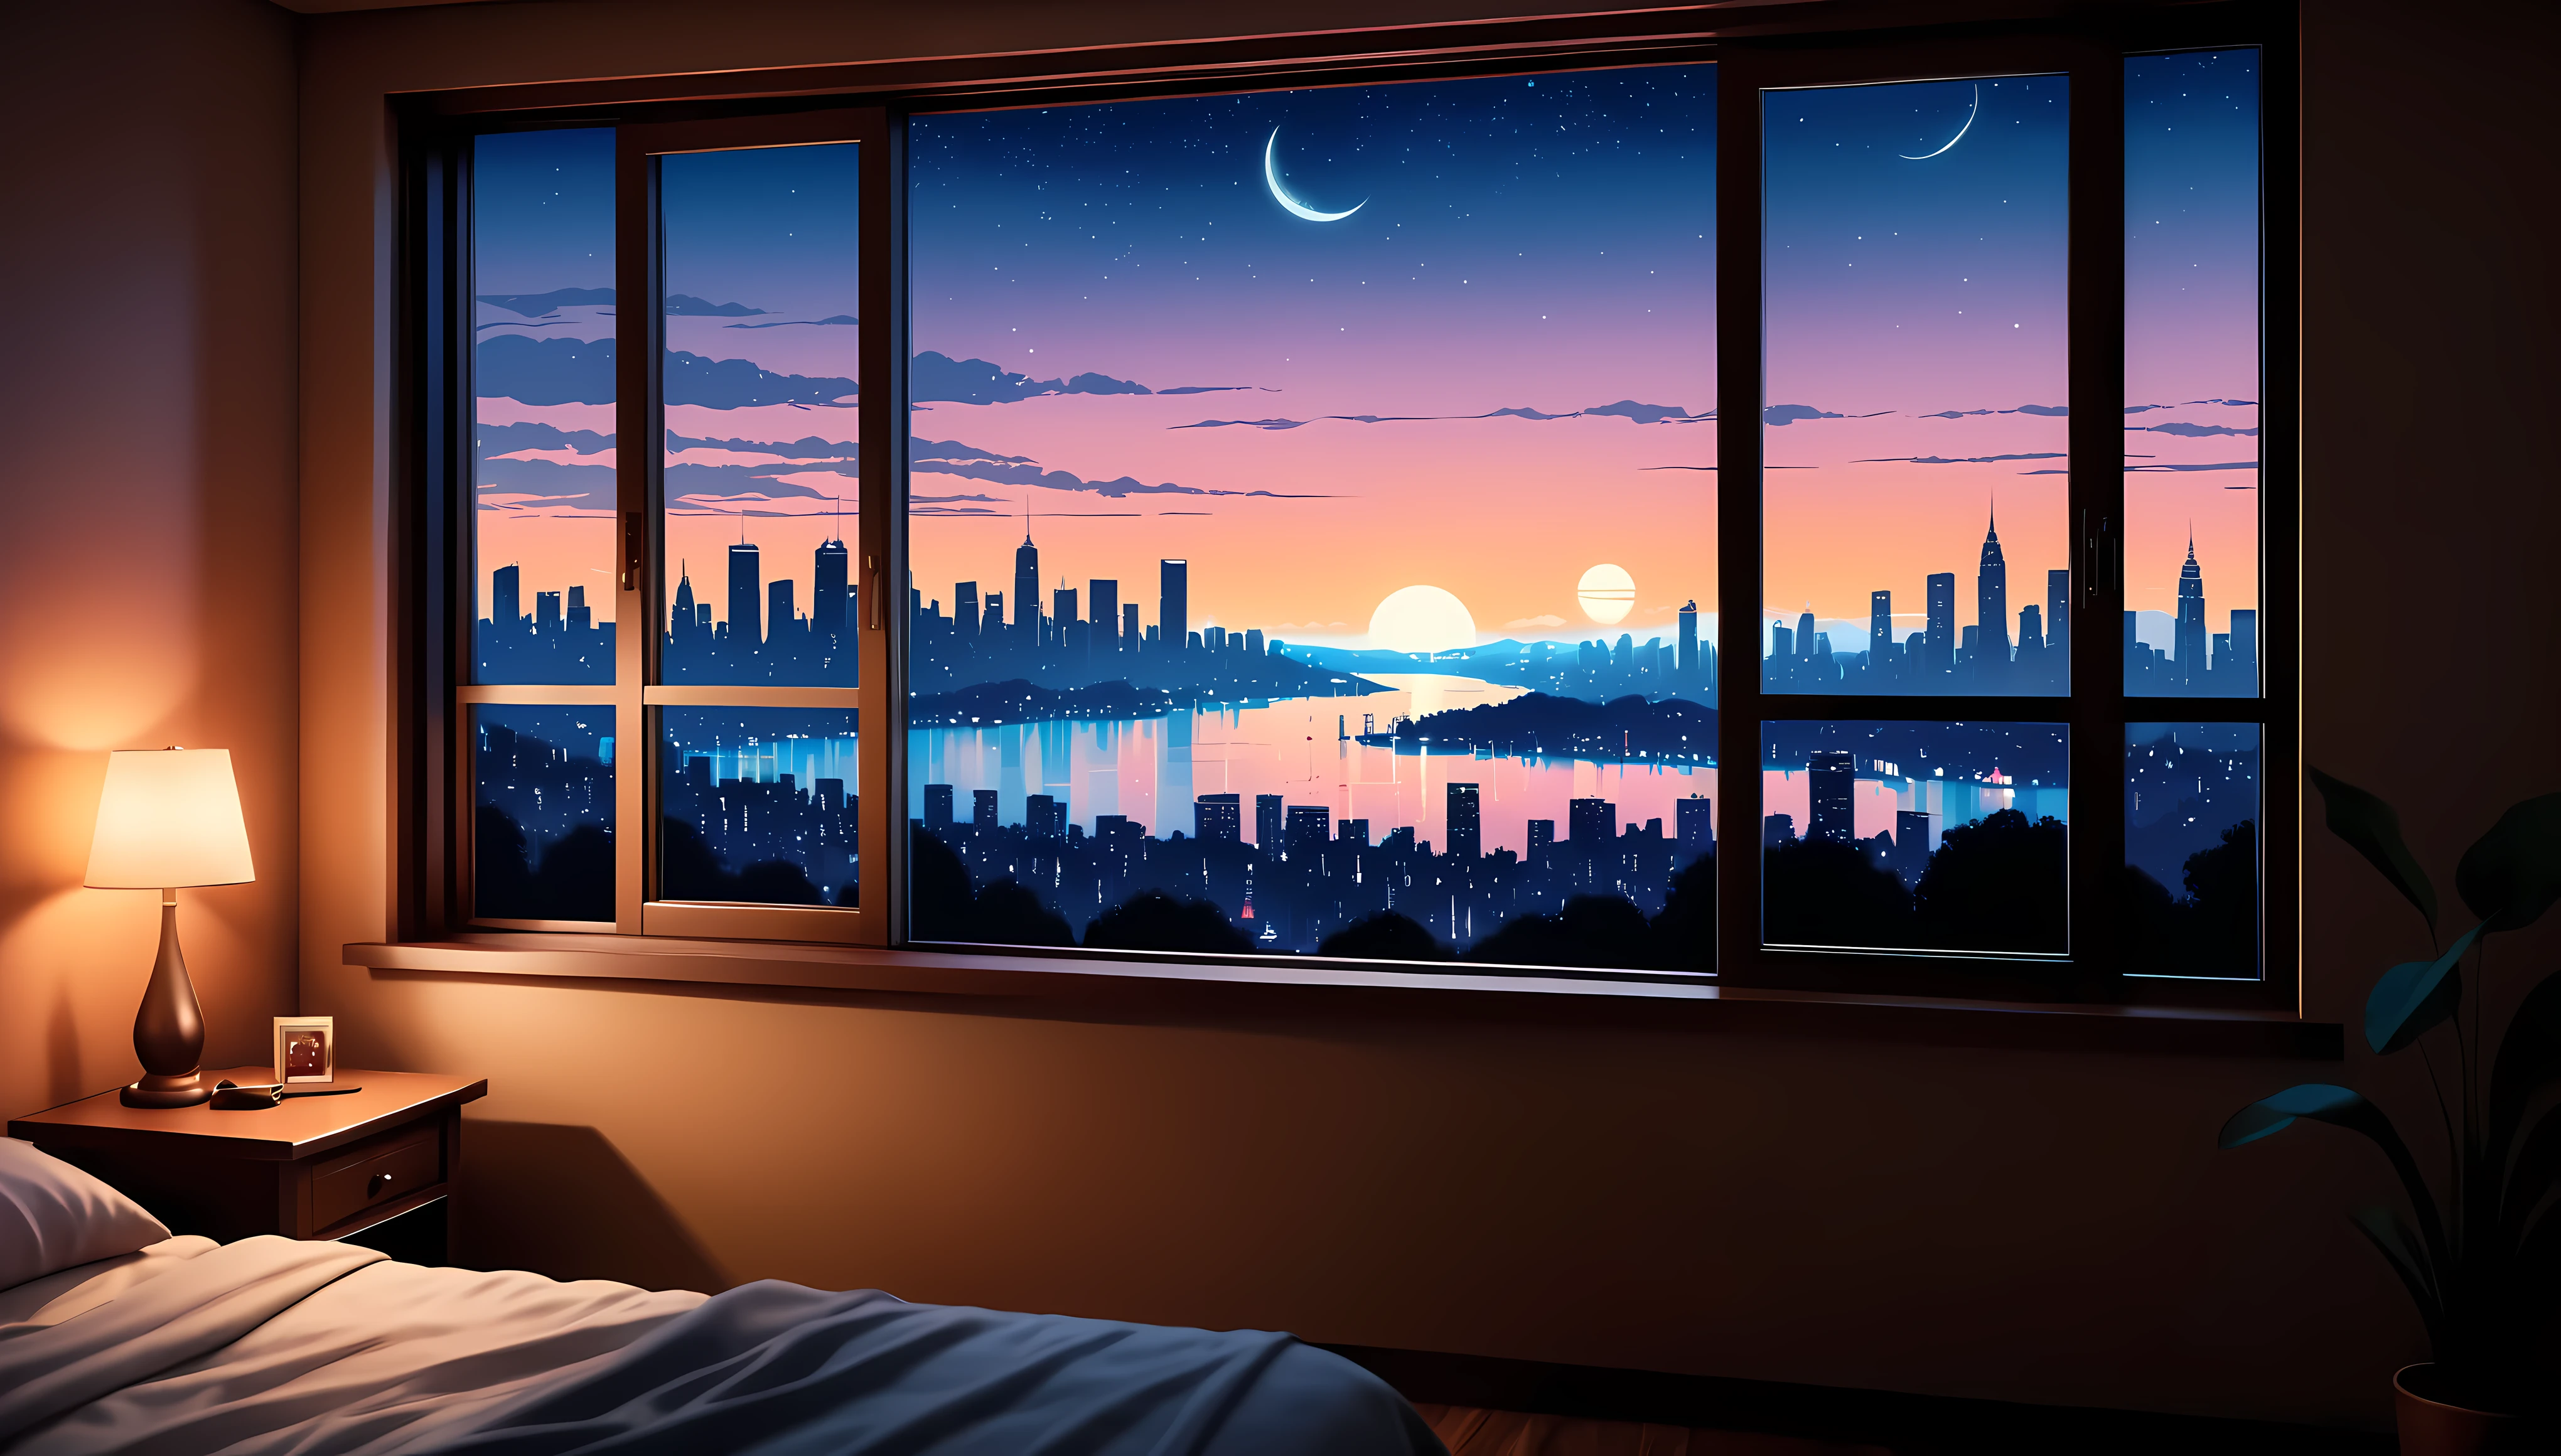 illustration of a room with a view of the city at night, scenery wallpaper aesthetic, wallpaper aesthetic, beautiful aesthetic art, beautiful and aesthetic, lofi artstyle, beautiful cityscape, lofi art, cozy wallpaper, anime background art, cityscape in the window, watching the sun set. anime, anime aesthetic, lo-fi illustration style, city sunset, lofi aesthetic. | ((Masterpiece in maximum 16K resolution):1.6),((soft_color_illustration:1.5), ((Ultra-Detailed):1.4),((Movie-like still images and dynamic angles):1.3), ((Ultra wide angle):1.5),((cinematic illustration style):1.3). | award winning masterpiece with incredible details, epic stunning, (shimmer), (visual experience), (Realism), (Realistic), award-winning graphics, dark shot, film grain, extremely detailed, Digital Art, rtx, Unreal Engine, scene concept anti glare effect, All captured with sharp focus. Rendered in ultra-high definition with UHD and retina quality, this masterpiece ensures anatomical correctness and textured skin with super detail. With a focus on high quality and accuracy, this award-winning portrayal captures every nuance in stunning 16k resolution, immersing viewers in its lifelike depiction. Avoid extreme angles or exaggerated expressions to maintain realism. ((perfect_composition, perfect_design, perfect_layout, perfect_detail, ultra_detailed)), ((enhance_all, fix_everything)),